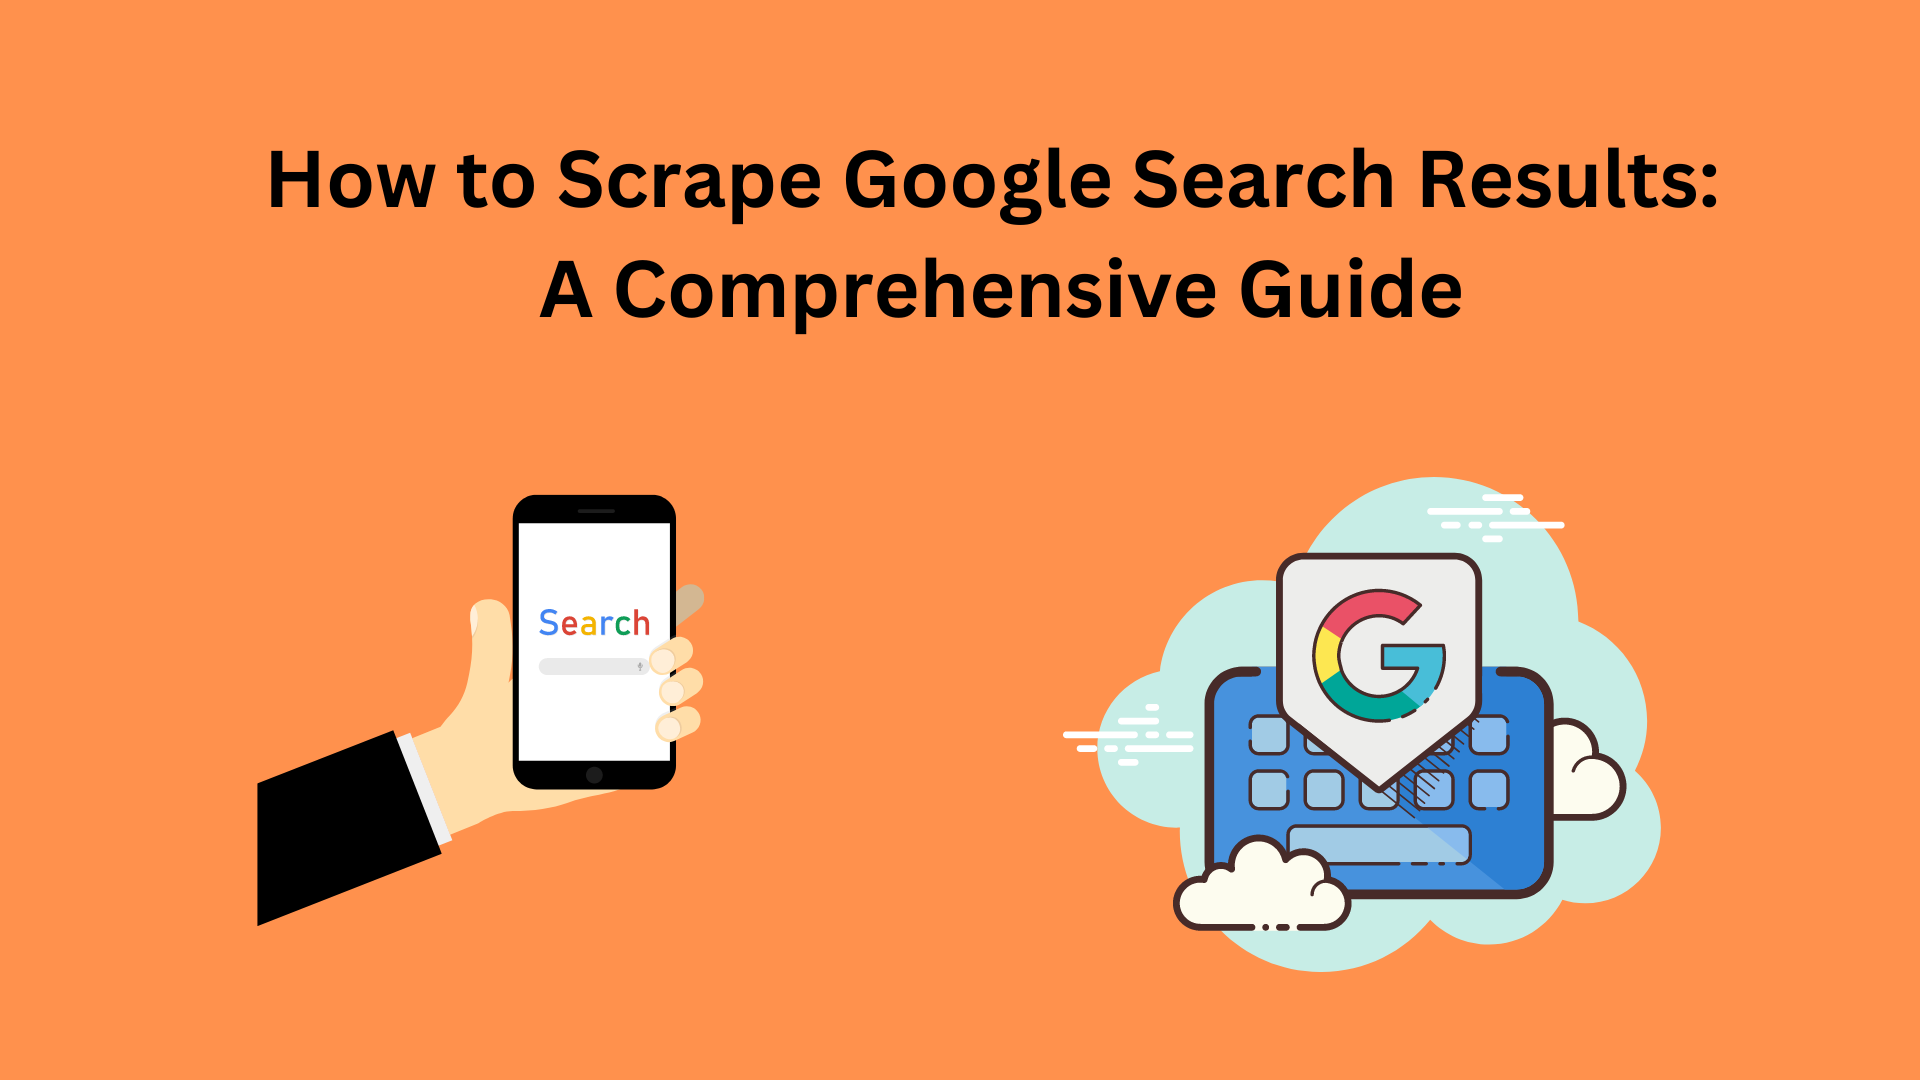 How to Scrape Google Search Results: A Comprehensive Guide